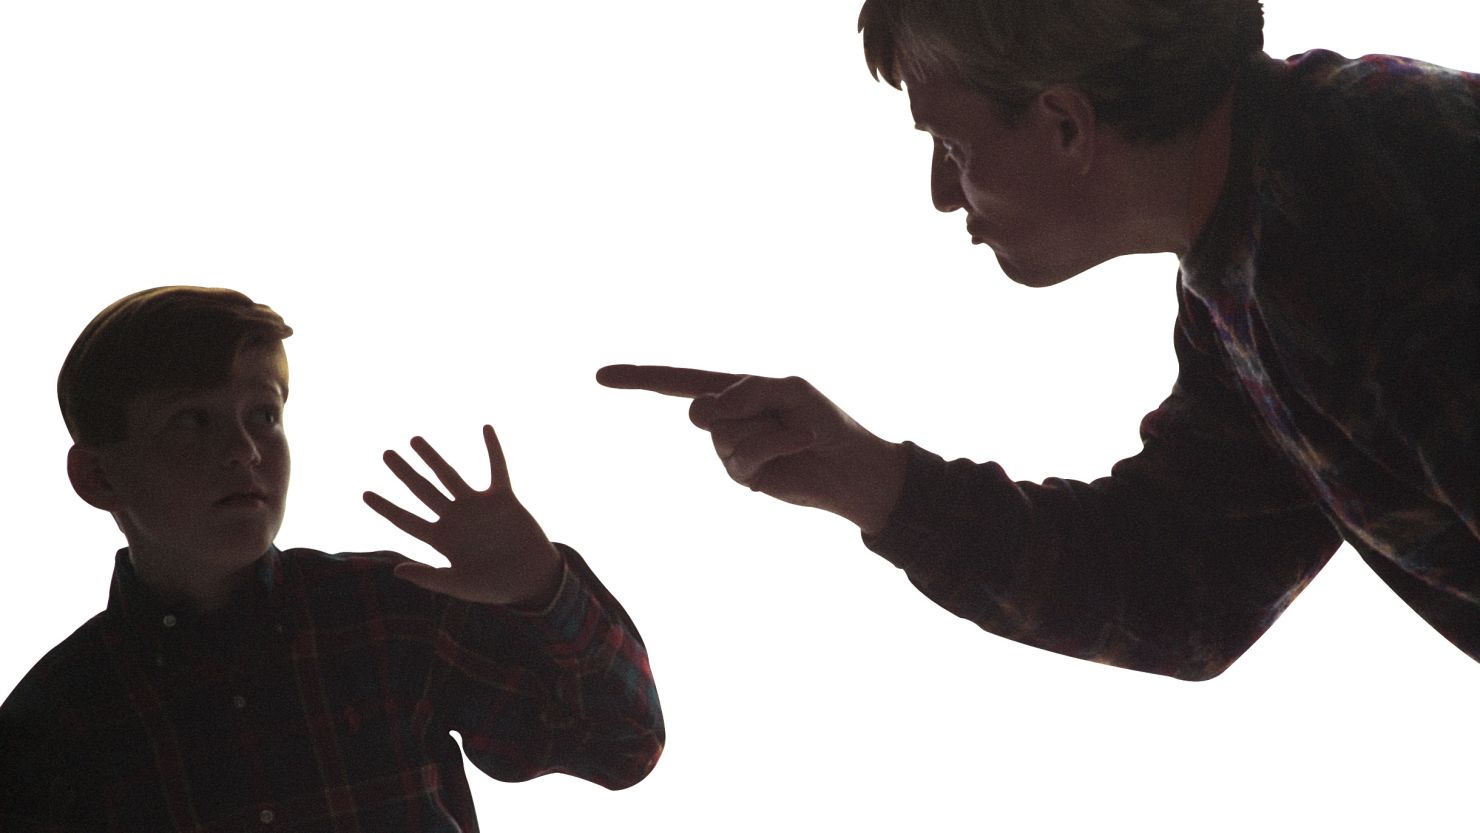 A  study finds that children who were spanked had more vocabulary and behavior problems when they were older.